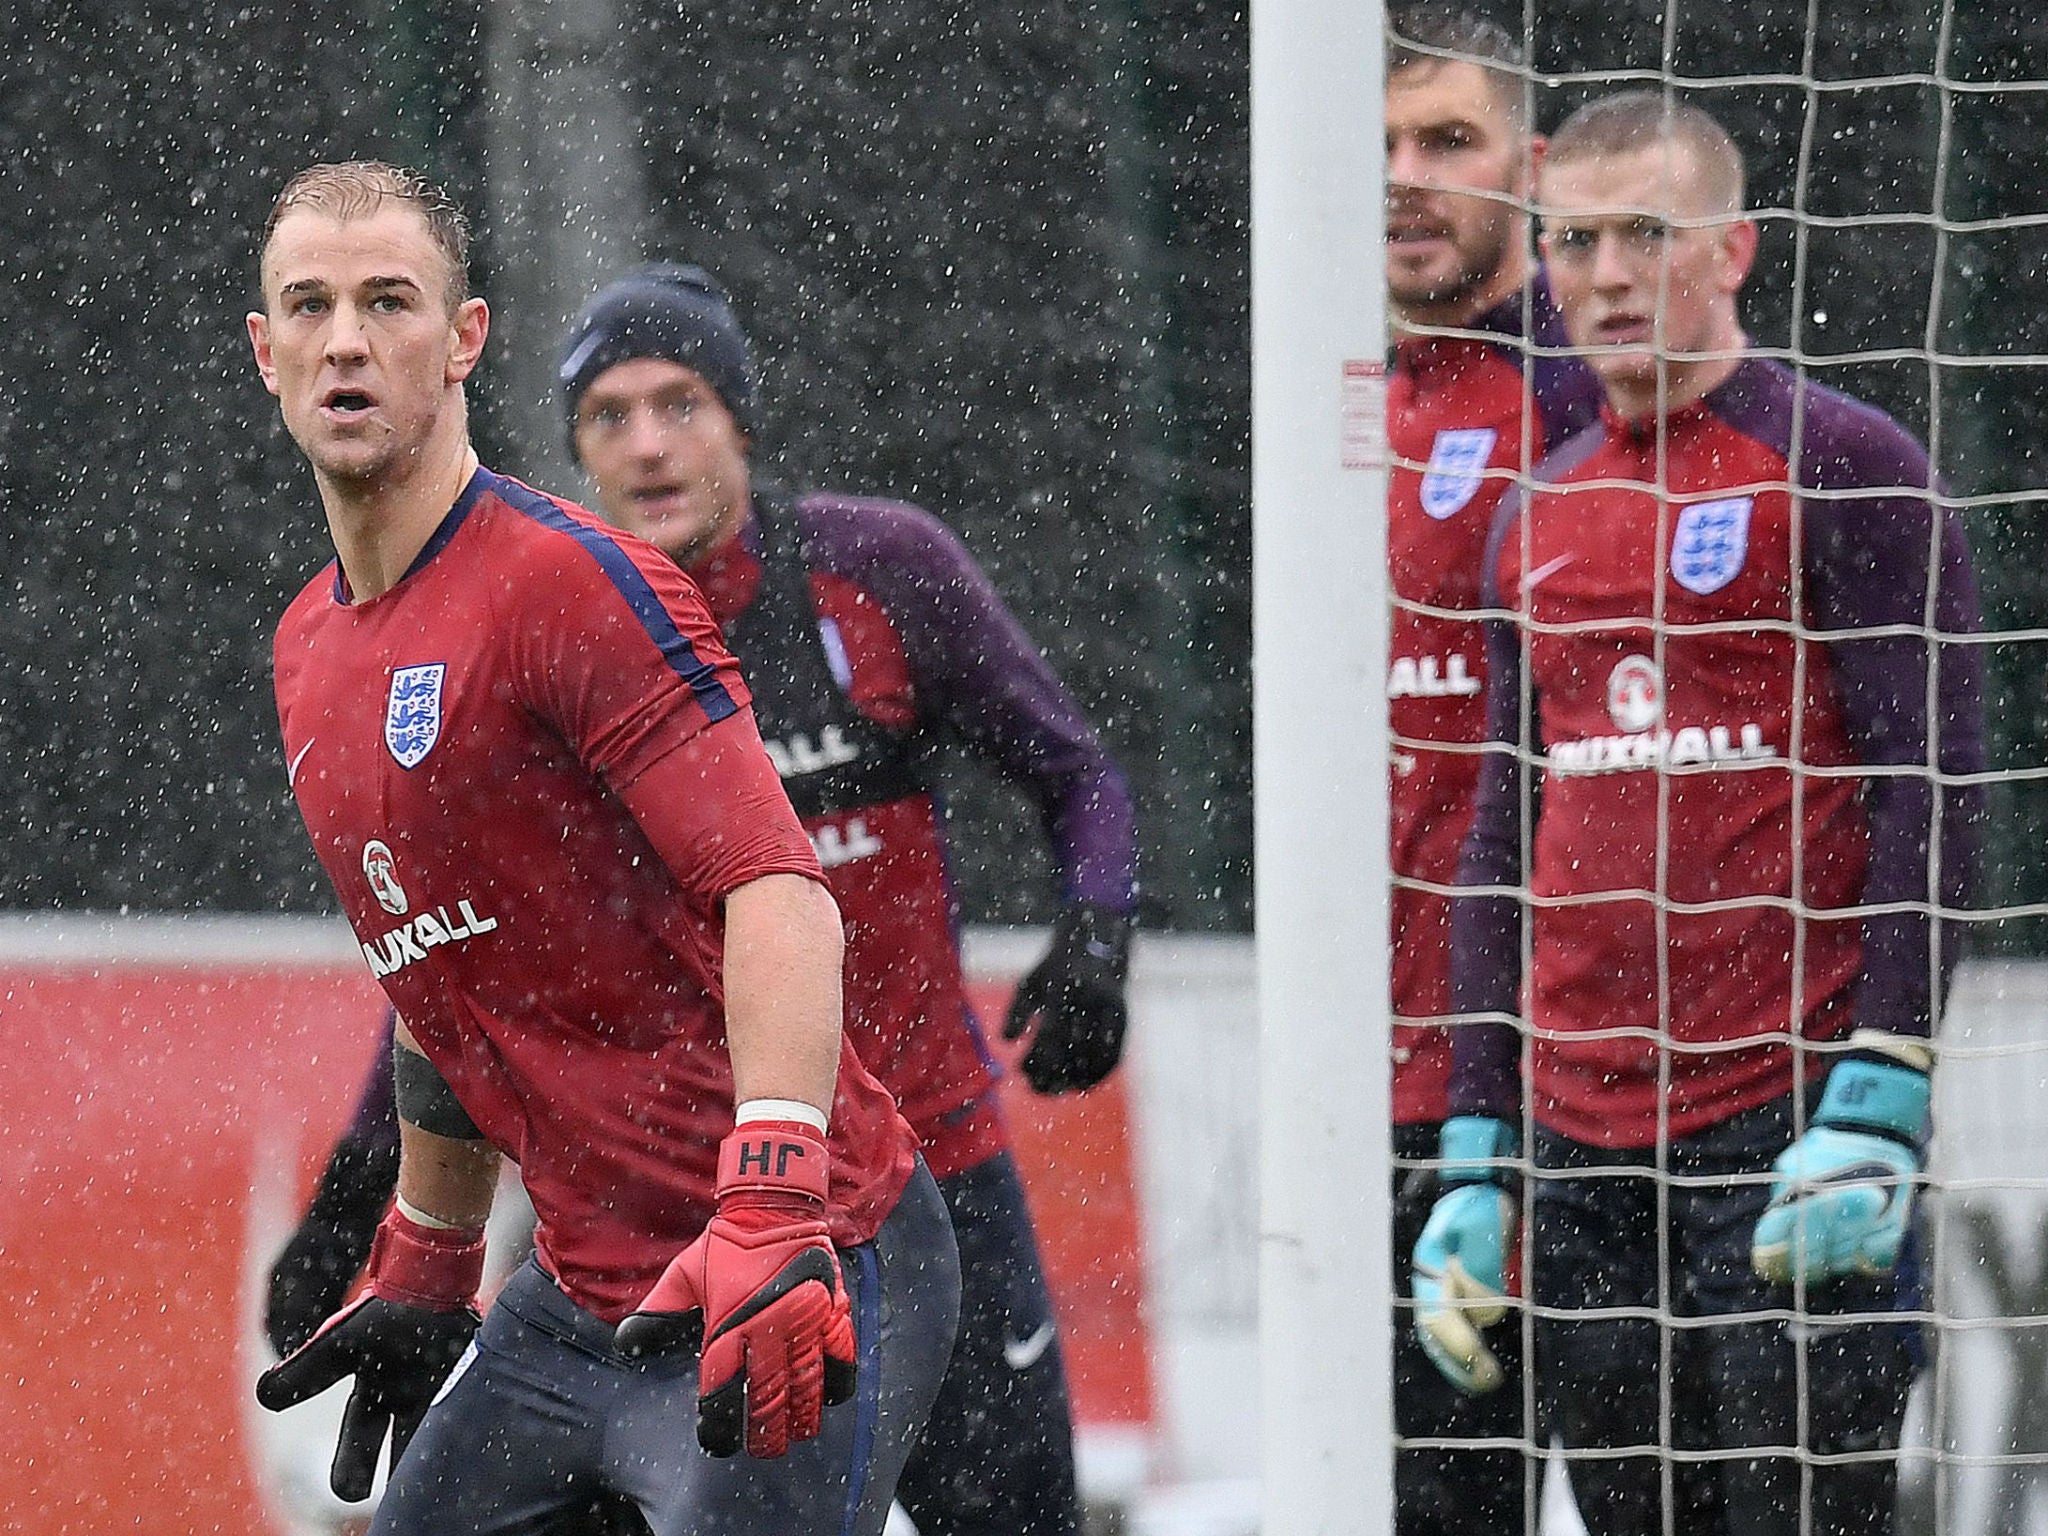 &#13;
Joe Hart faces competition for his starting spot in England's starting XI &#13;